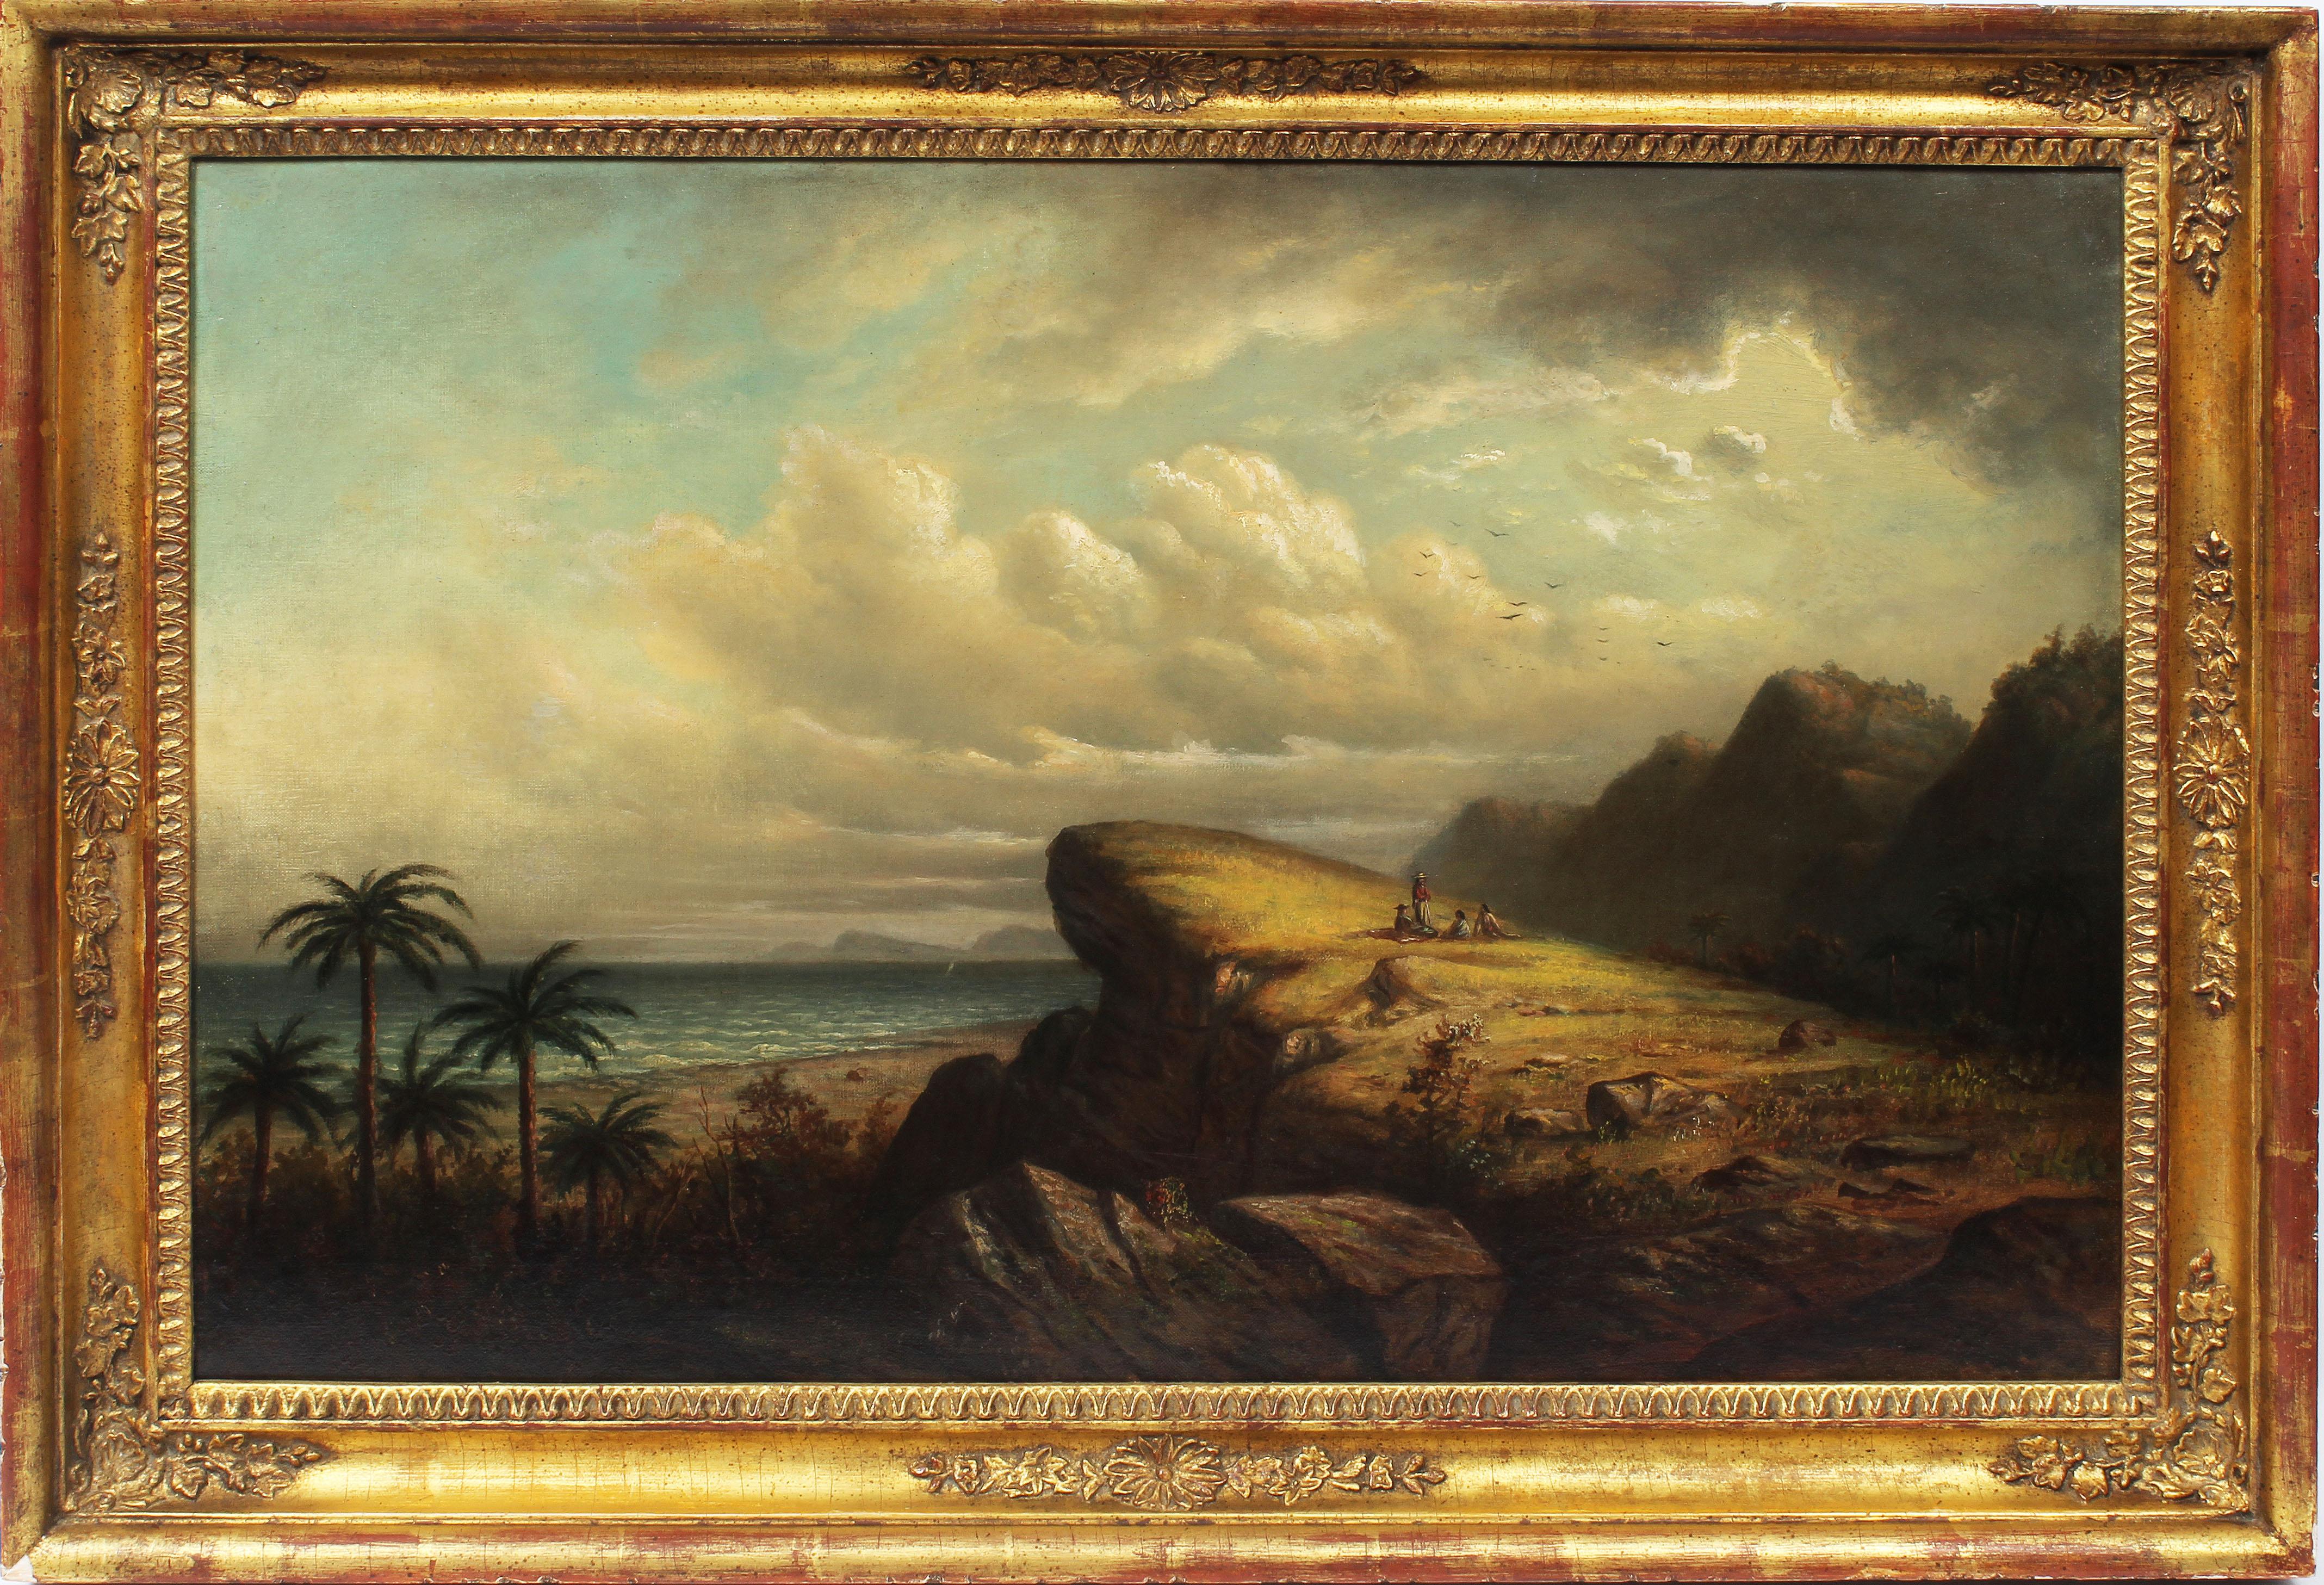 Harold Rudolph Landscape Painting - Antique American Southern School Tropical Coastal Ocean Landscape Oil Painting